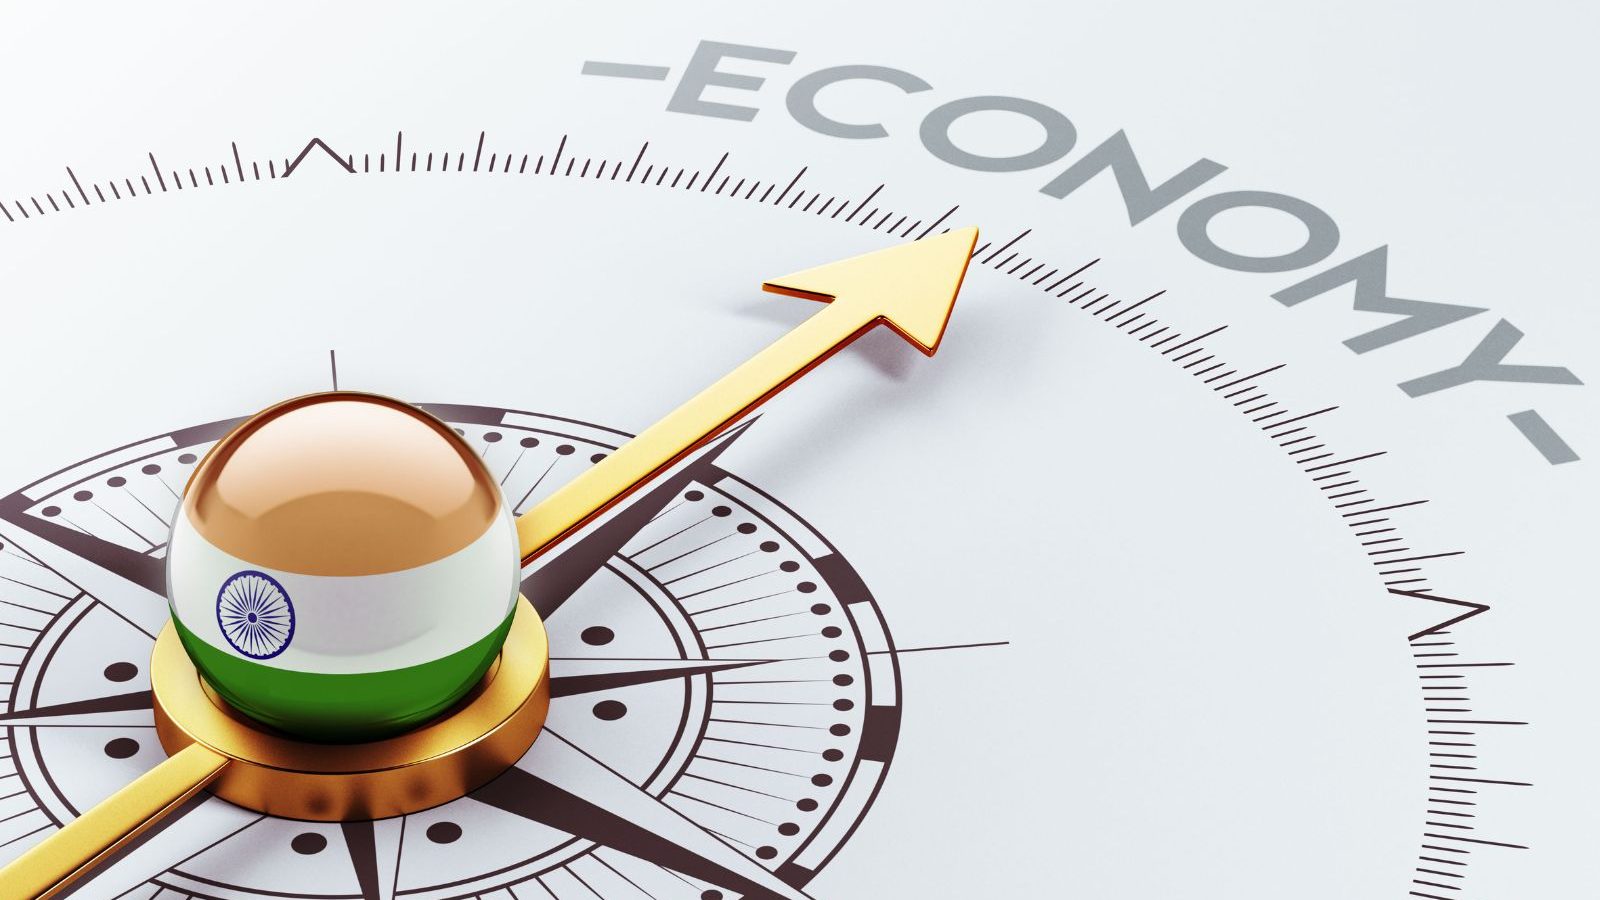 India's Economic Resilience Despite A Global Crisis Makes the World Take Lessons